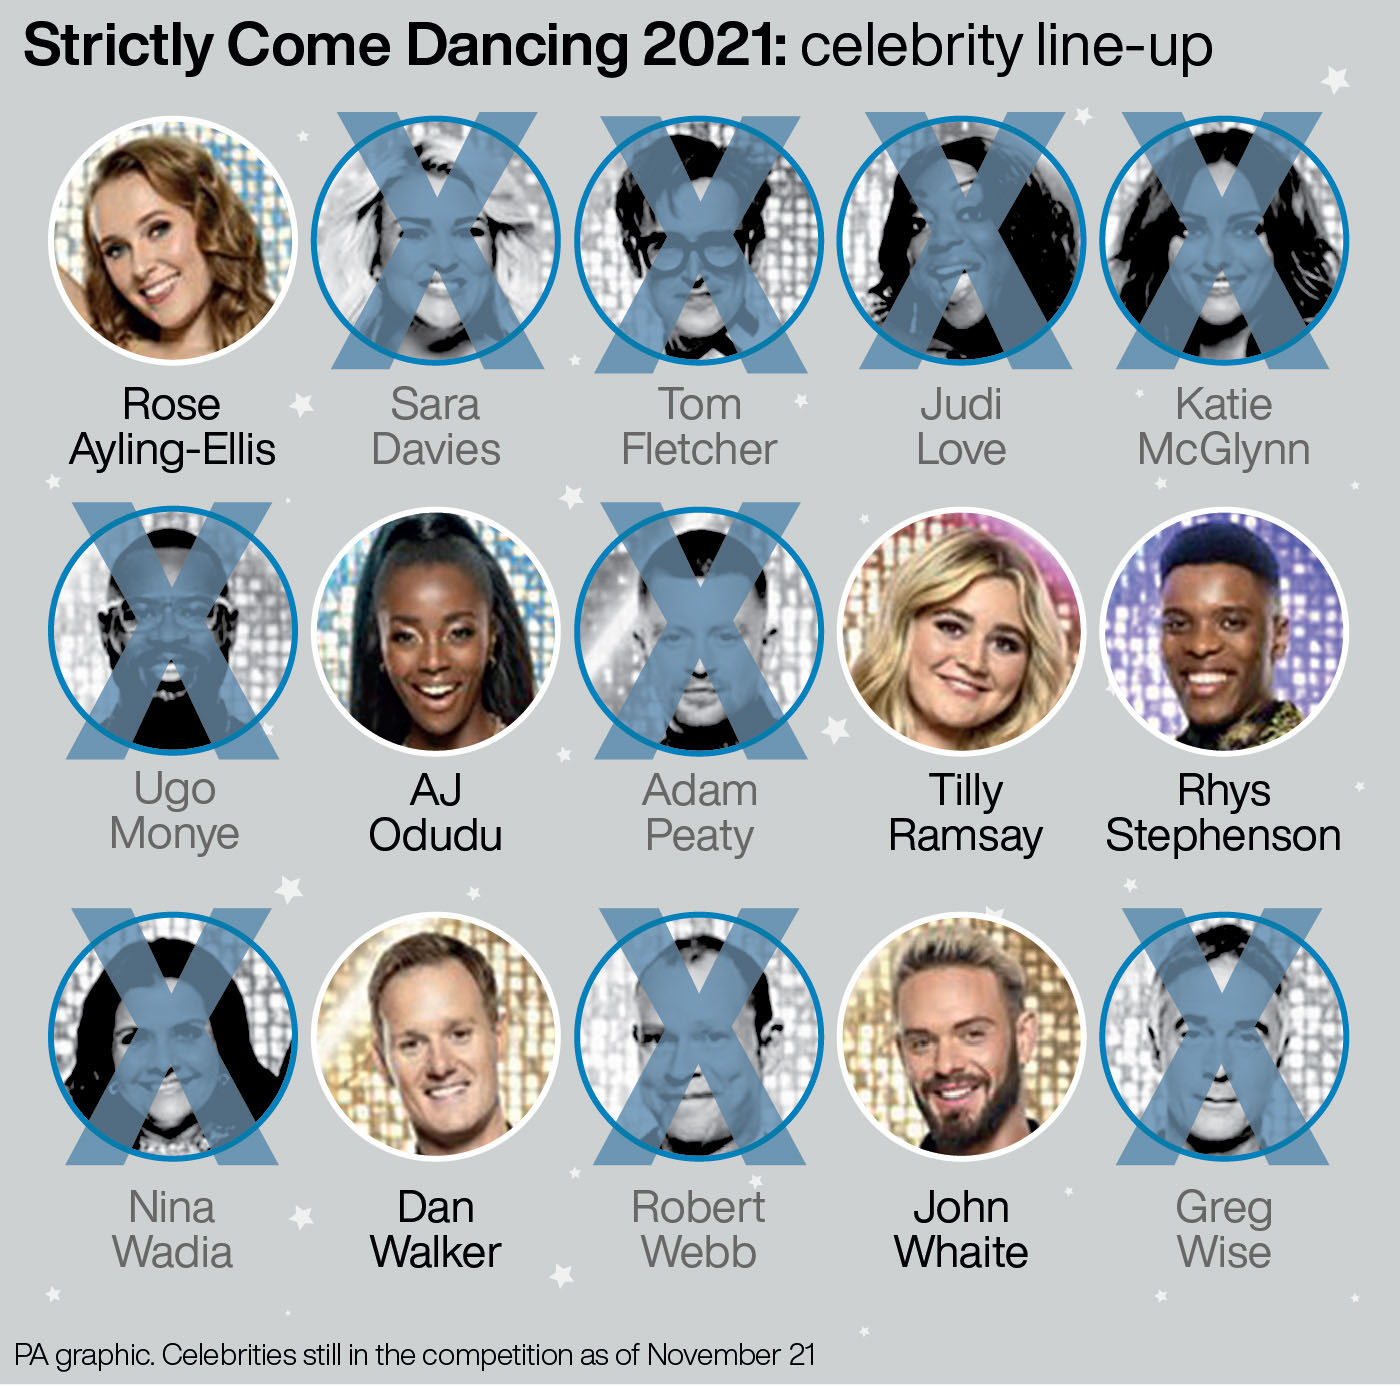 Strictly Come Dancing 2021: celebrity line-up